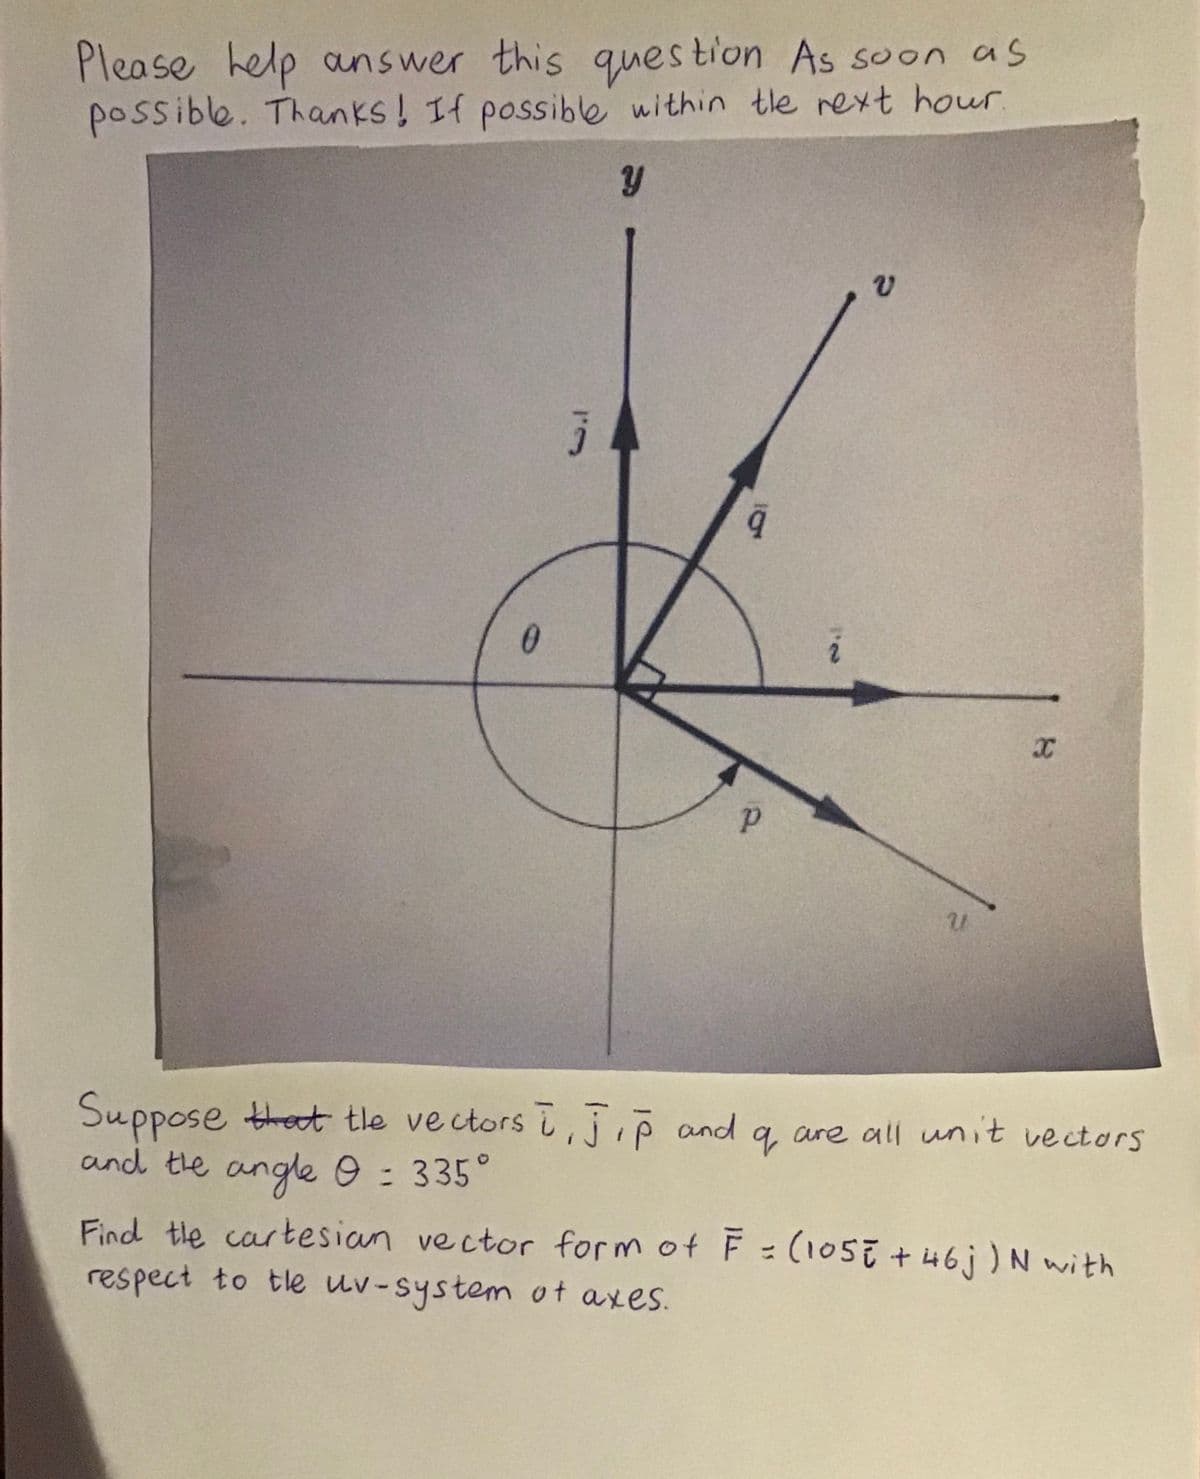 Please help answer this ques tion As soon as
possible. Thanks! If possible within tle rext hour
Suppose thet tle vectors i, jip and a, are all unit vectors
and the angle 9 = 335°
Find the cartesian vector form of F= (105E + 46j)N with
respect to tle uv-system ot axes.
